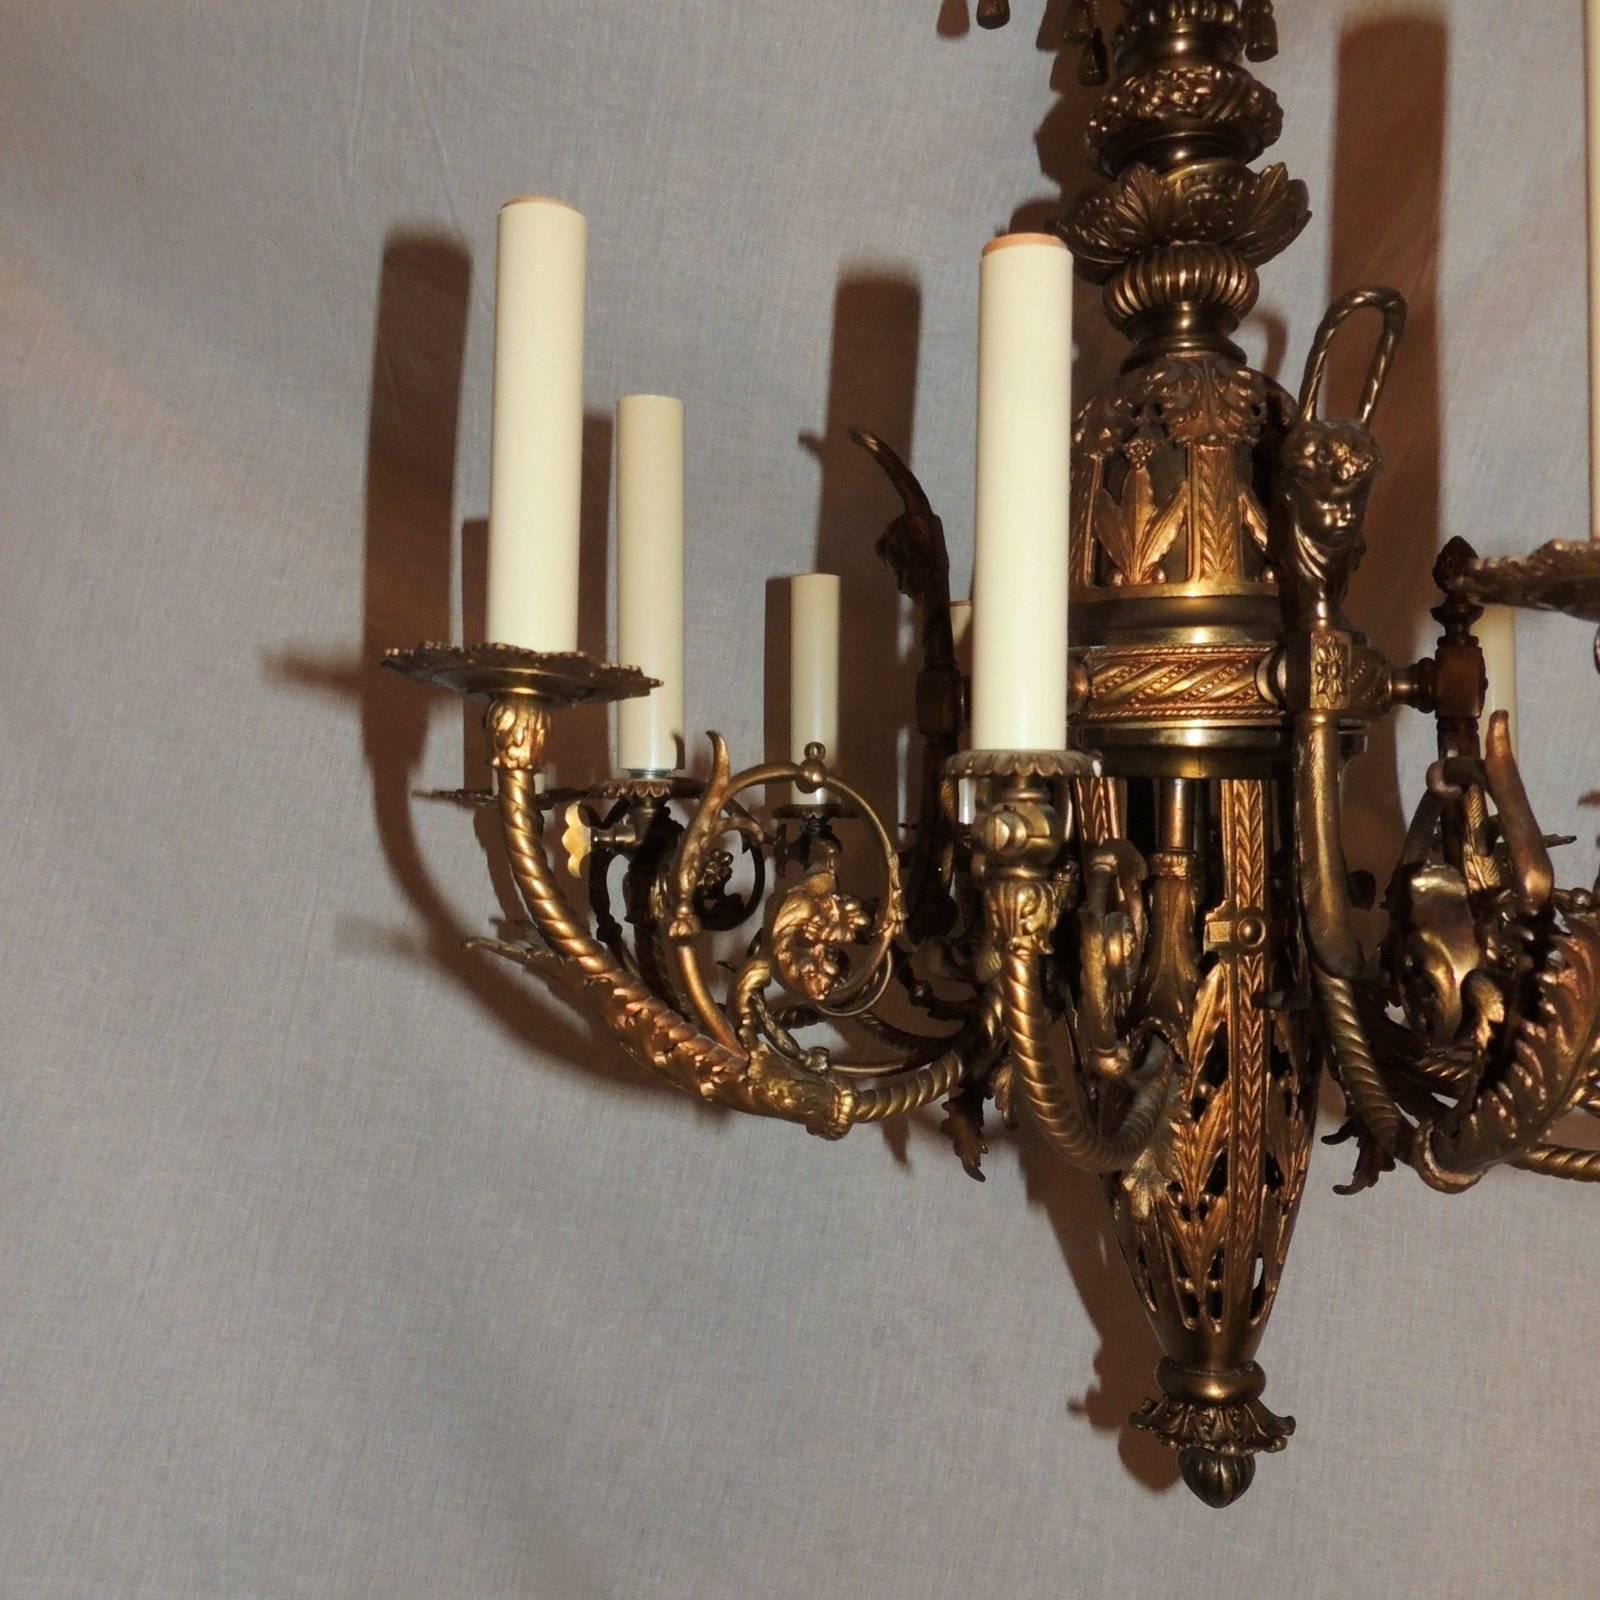 French Empire Neoclassical Doré Bronze Twelve-Light Tassel Chandelier Fixture In Good Condition For Sale In Roslyn, NY